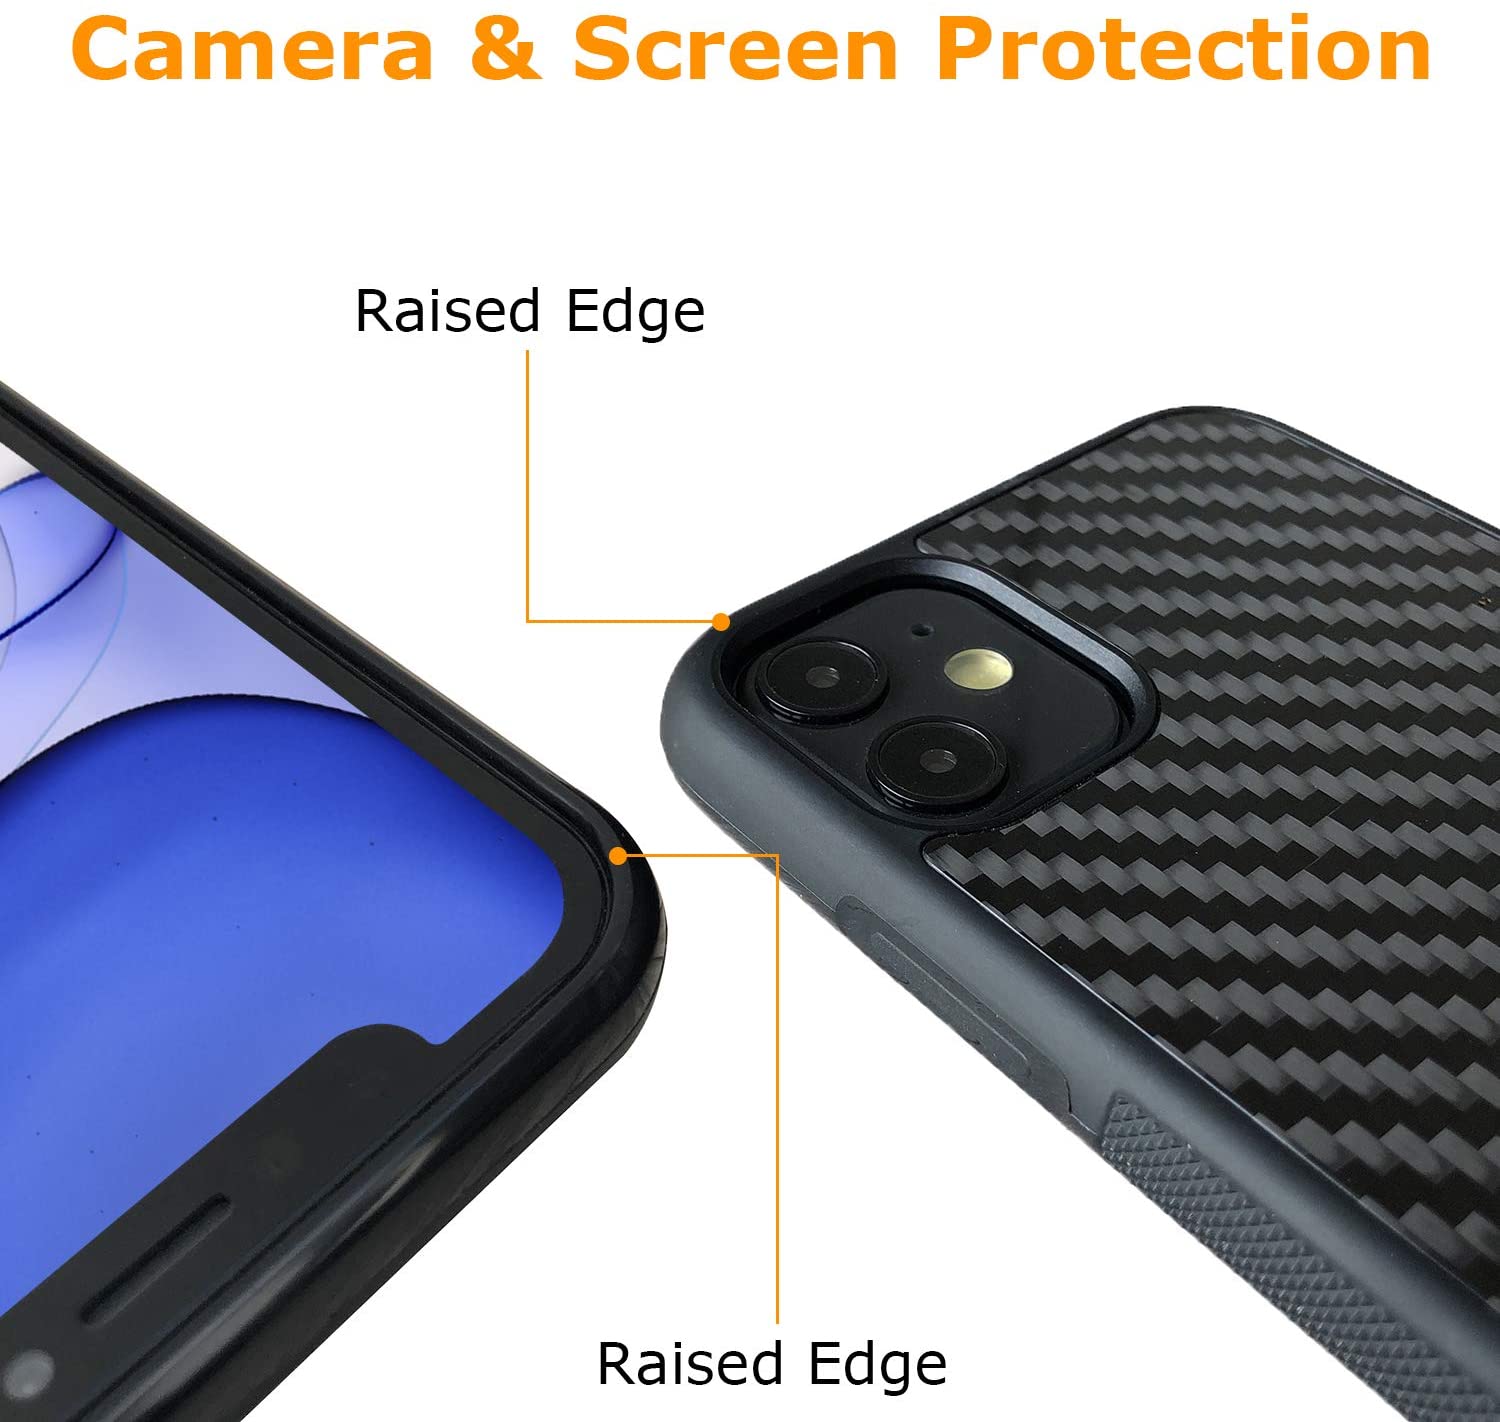 Molzar Grip Series iPhone 11 Case with Real Weave Carbon Fiber - Molzar-iphone cases and accessories